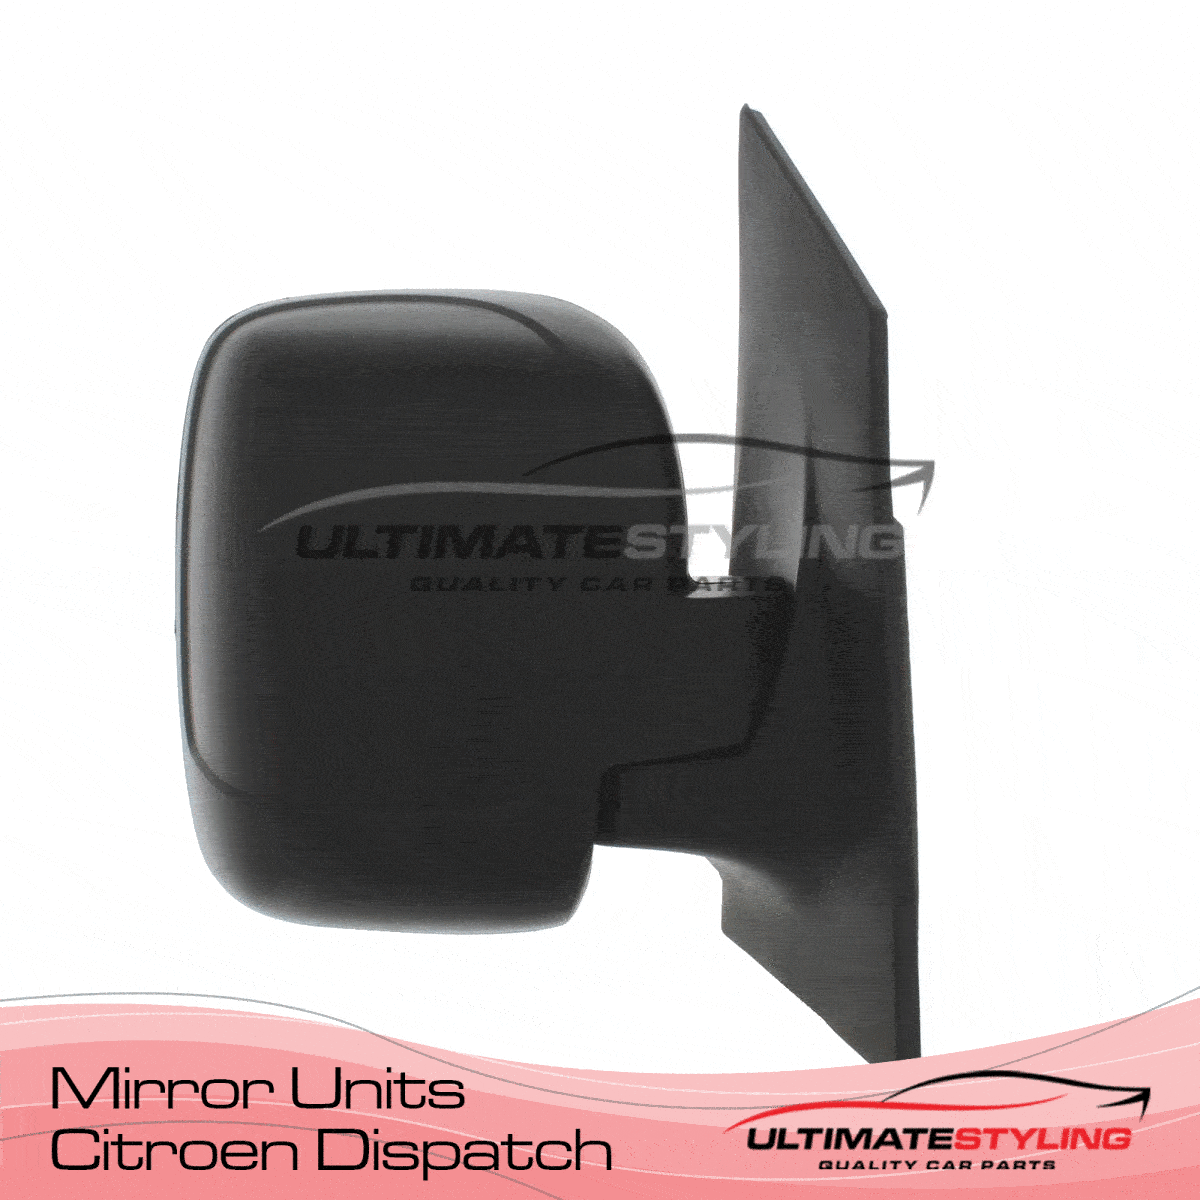 360 view of a Citroen Dispatch drivers wing mirror